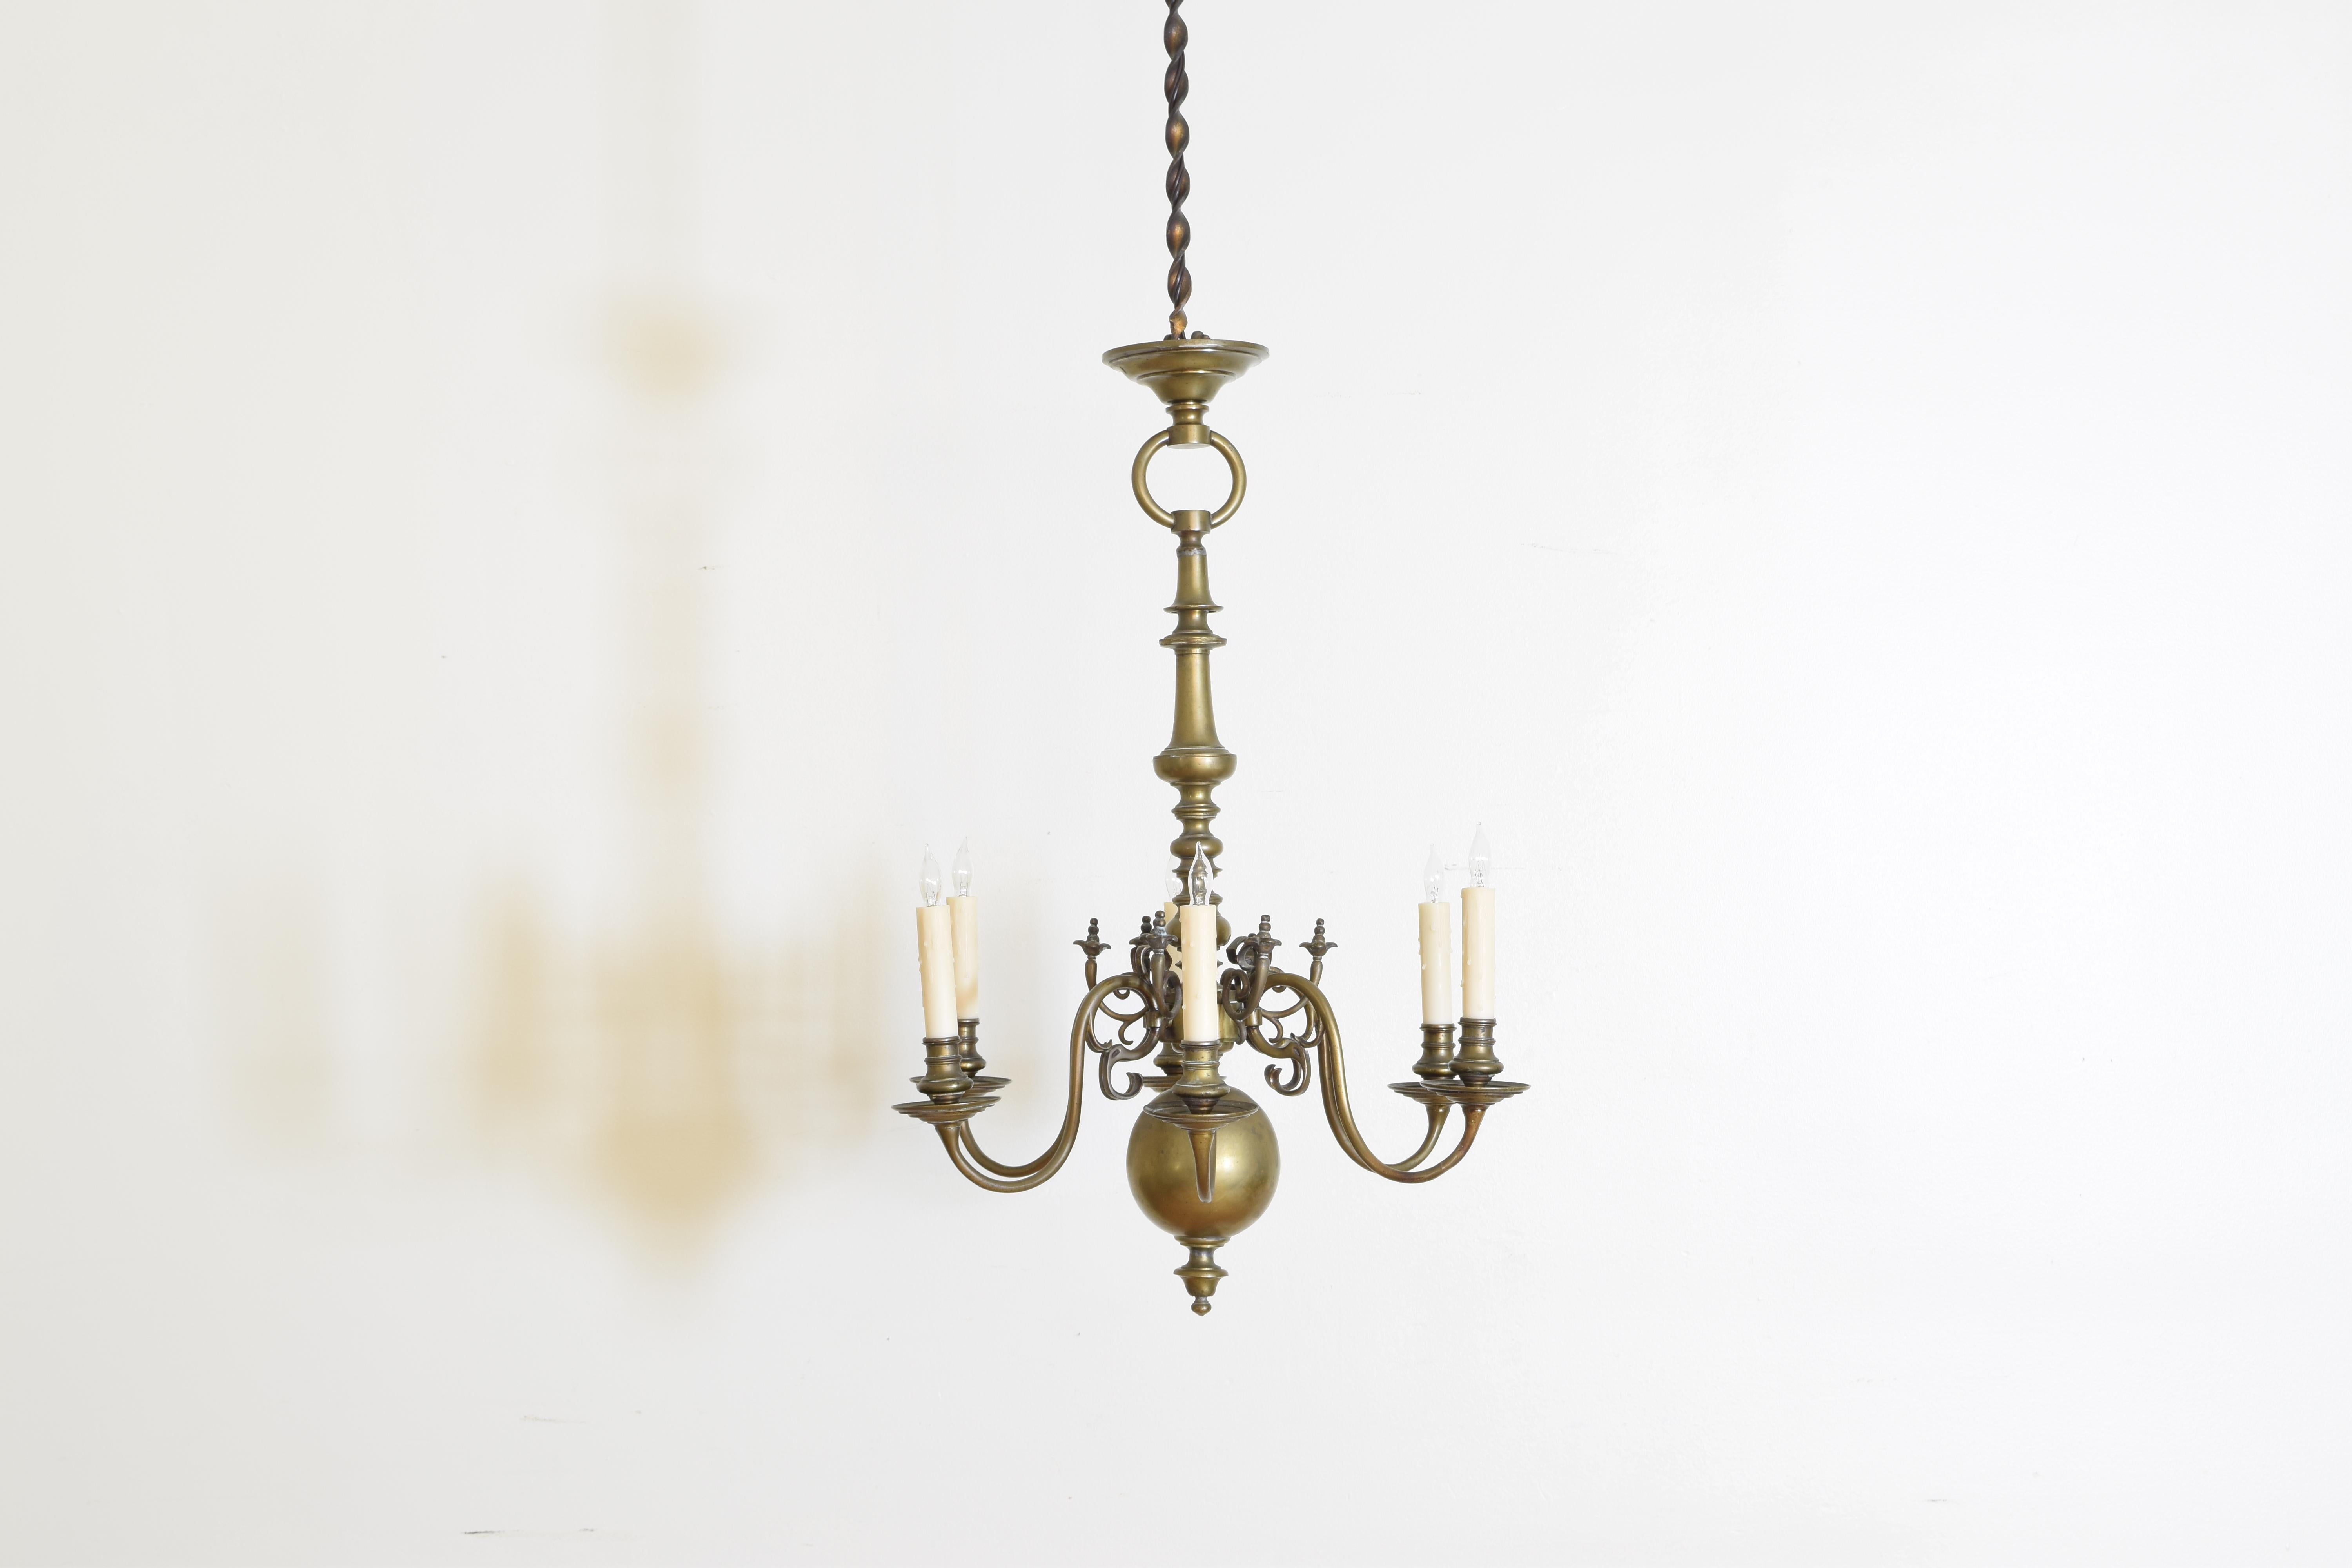 Cast Dutch Baroque Style Patinated Brass 6-Light Chandelier, Late 19th Century